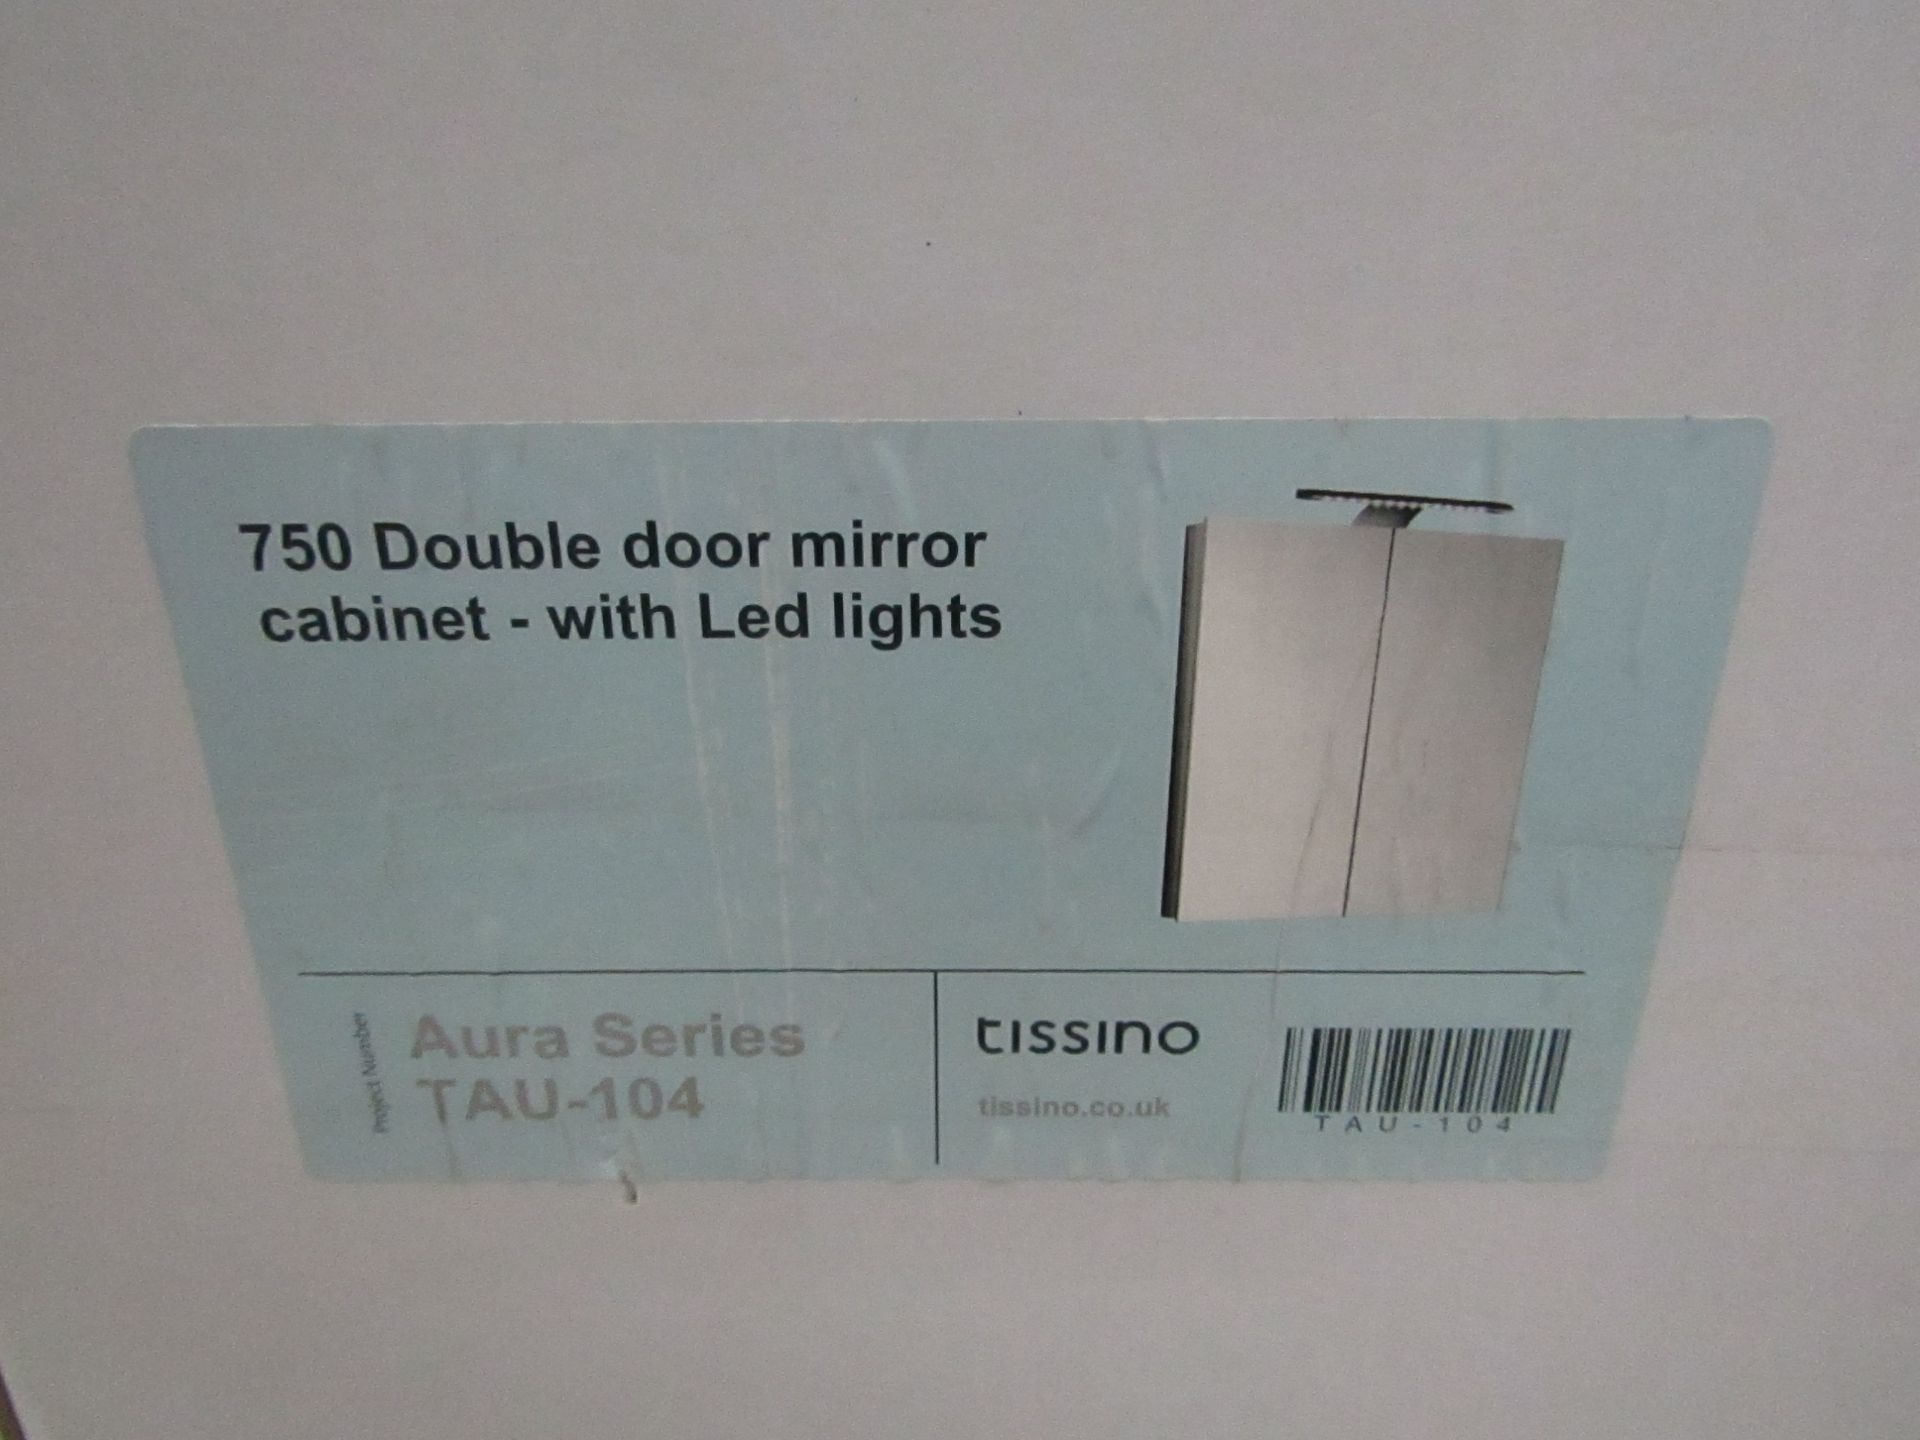 Tissino 750 double door mirrored cabinet, no visisble damage and boxed